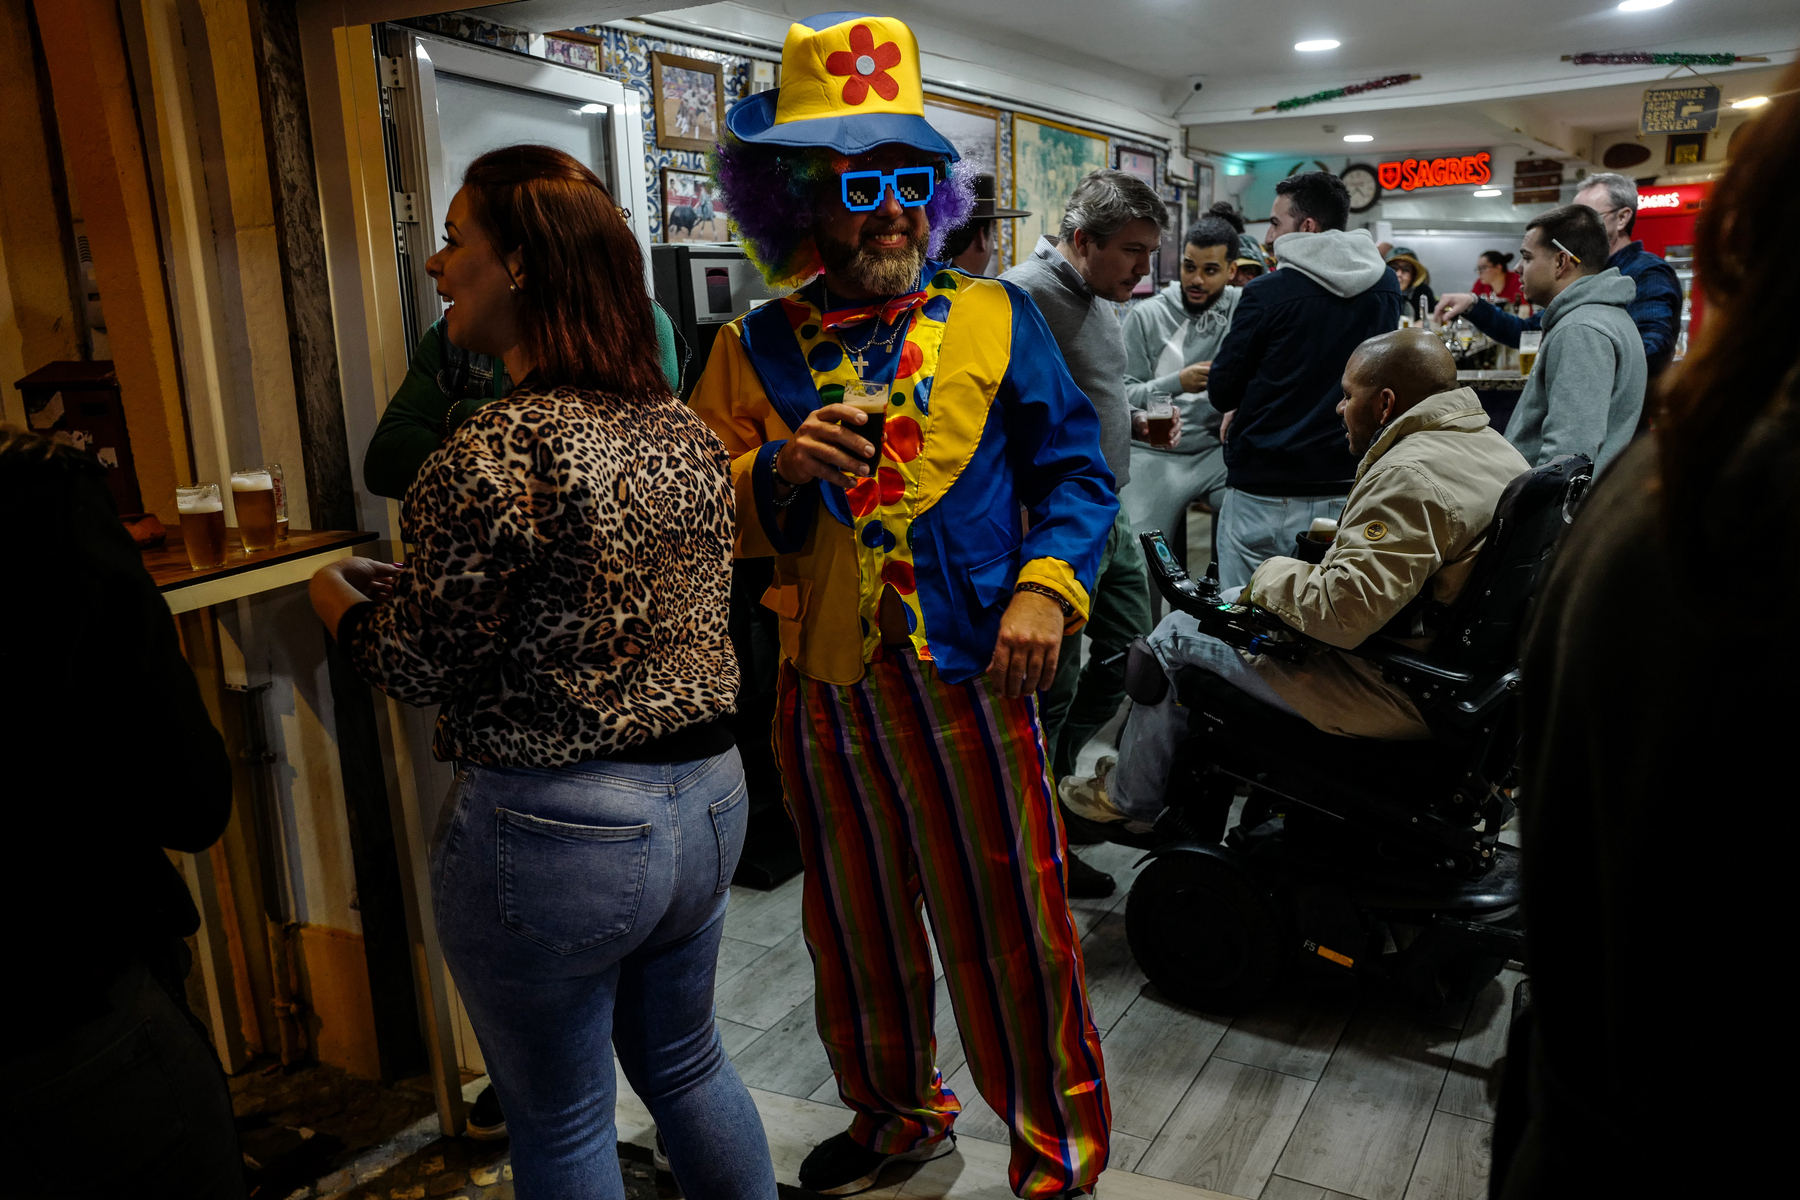 A person in a colorful clown costume with a hat, sunglasses, and wig stands with a drink in hand in a crowded indoor space, with other people visible in the background.